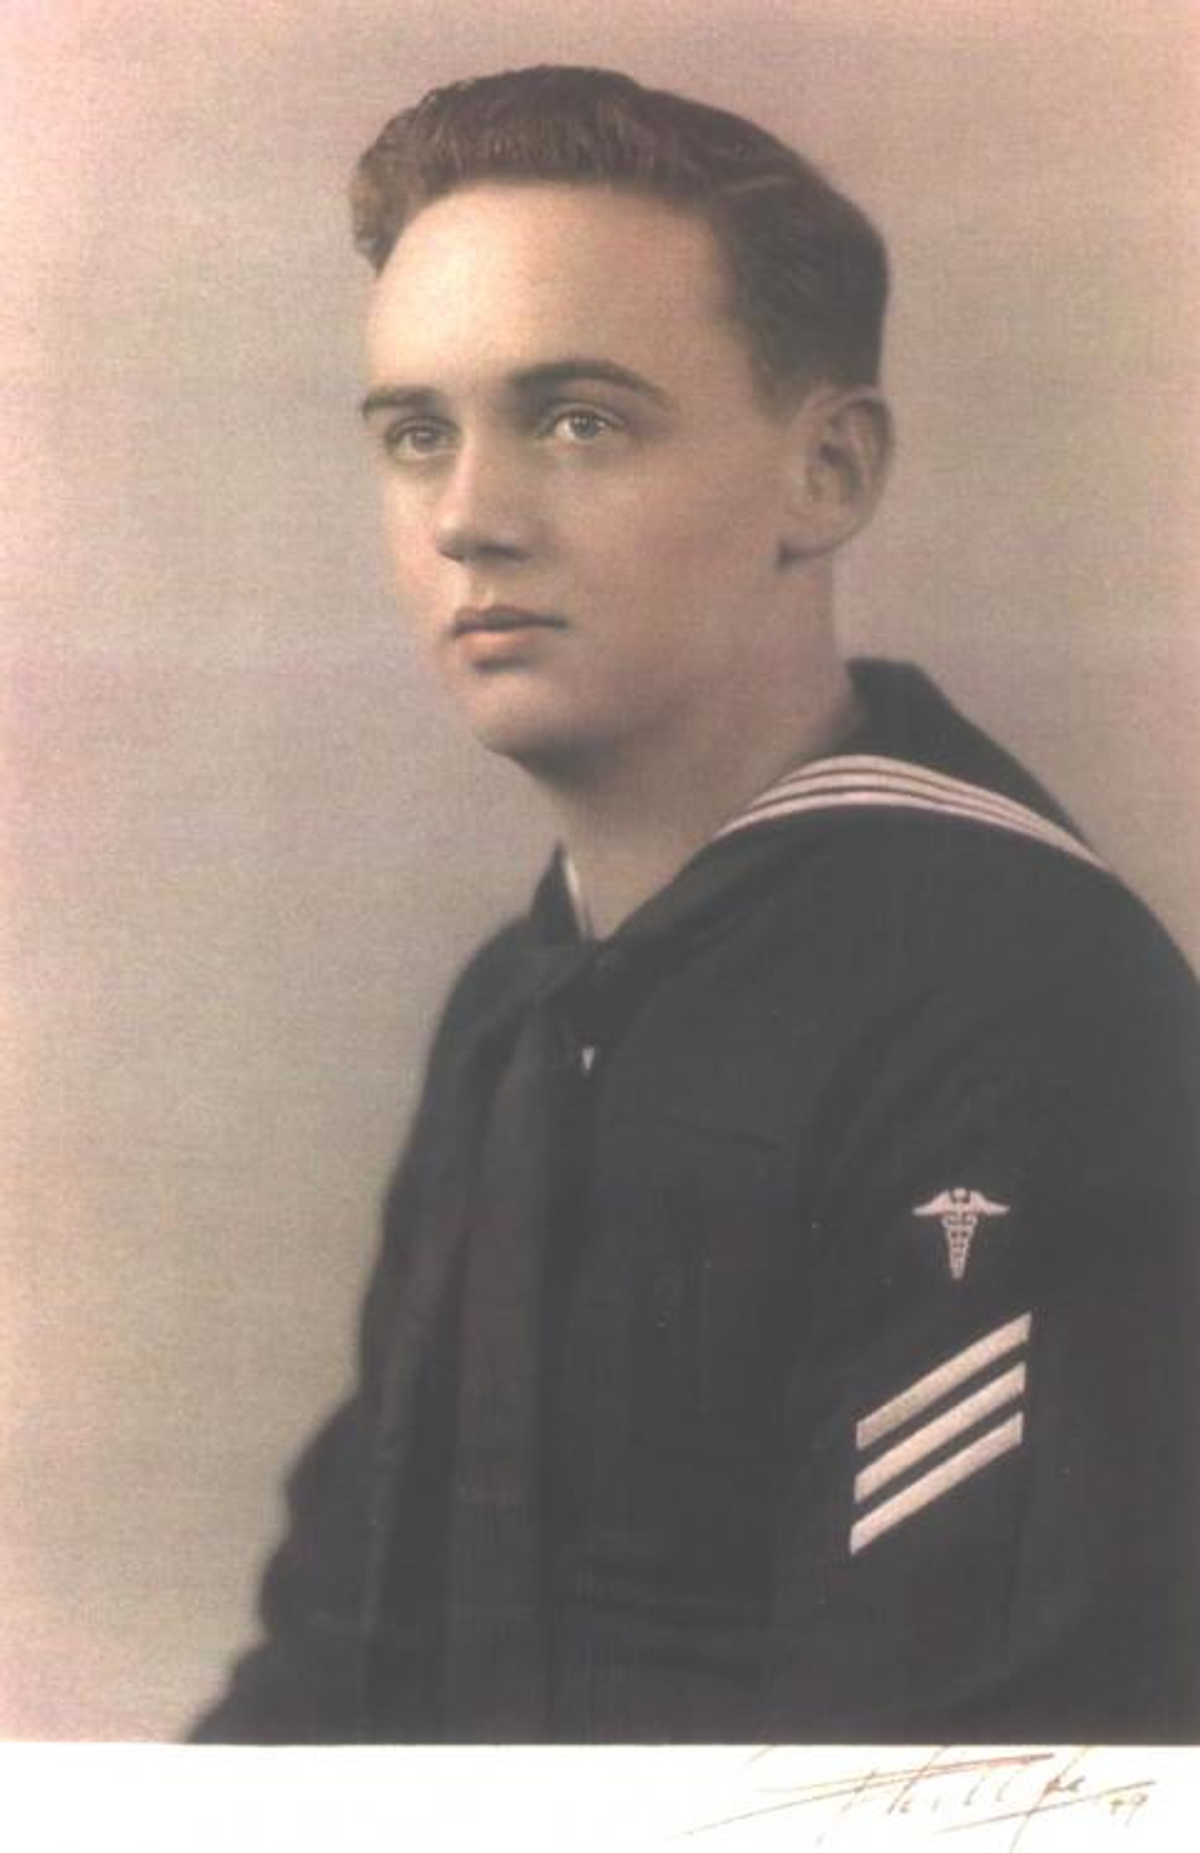 The author's father at 19